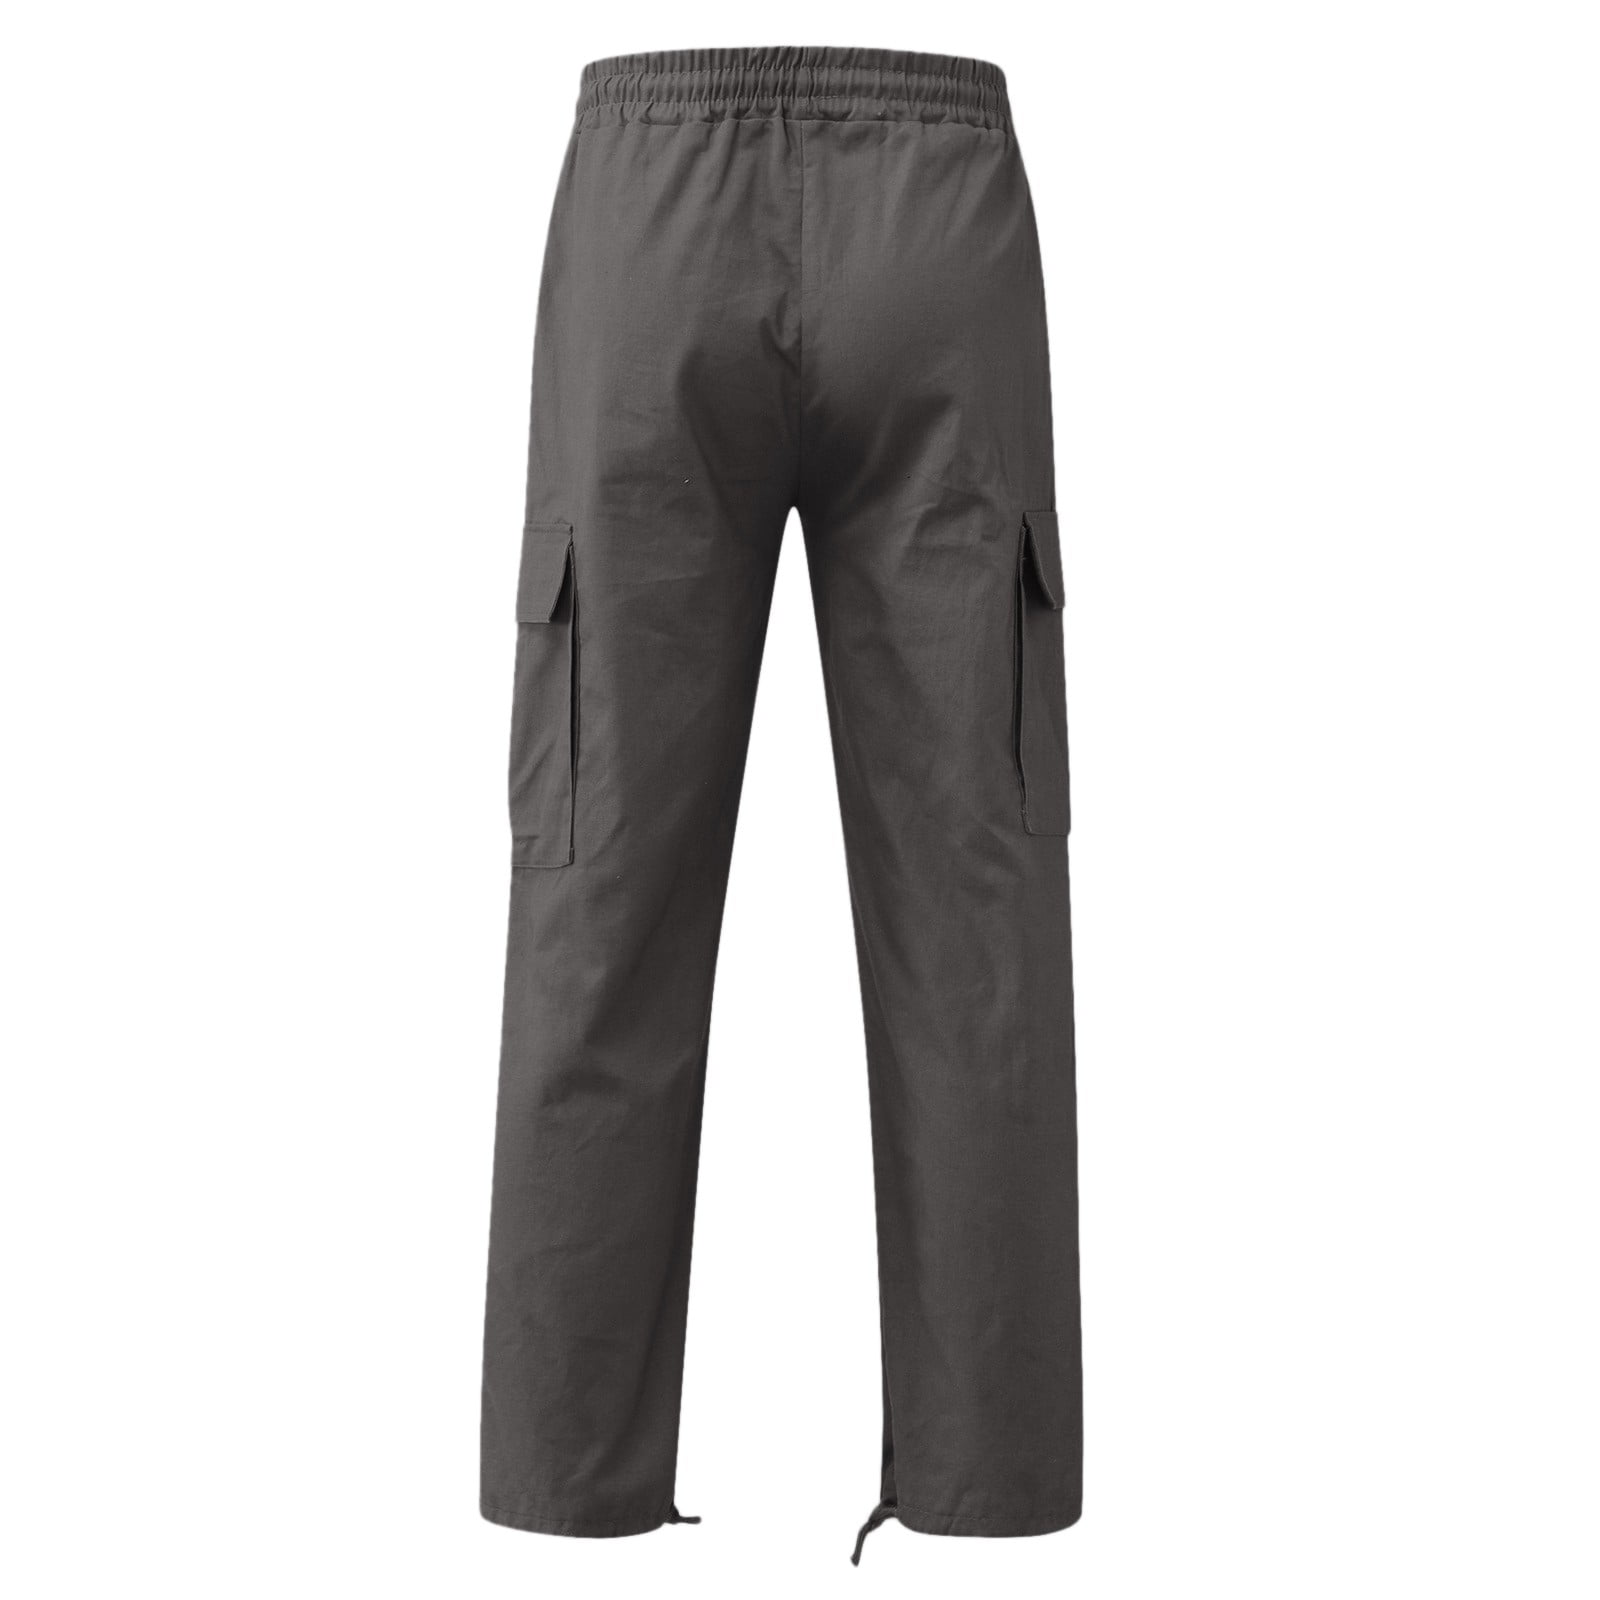 Mens Spring Urbanic Cargo Pants With Cotton Drawstring, Multiple Pockets,  Ankle Banded In Purple And Black BINHIIRO 201118227D From Lqbyc, $53.28 |  DHgate.Com